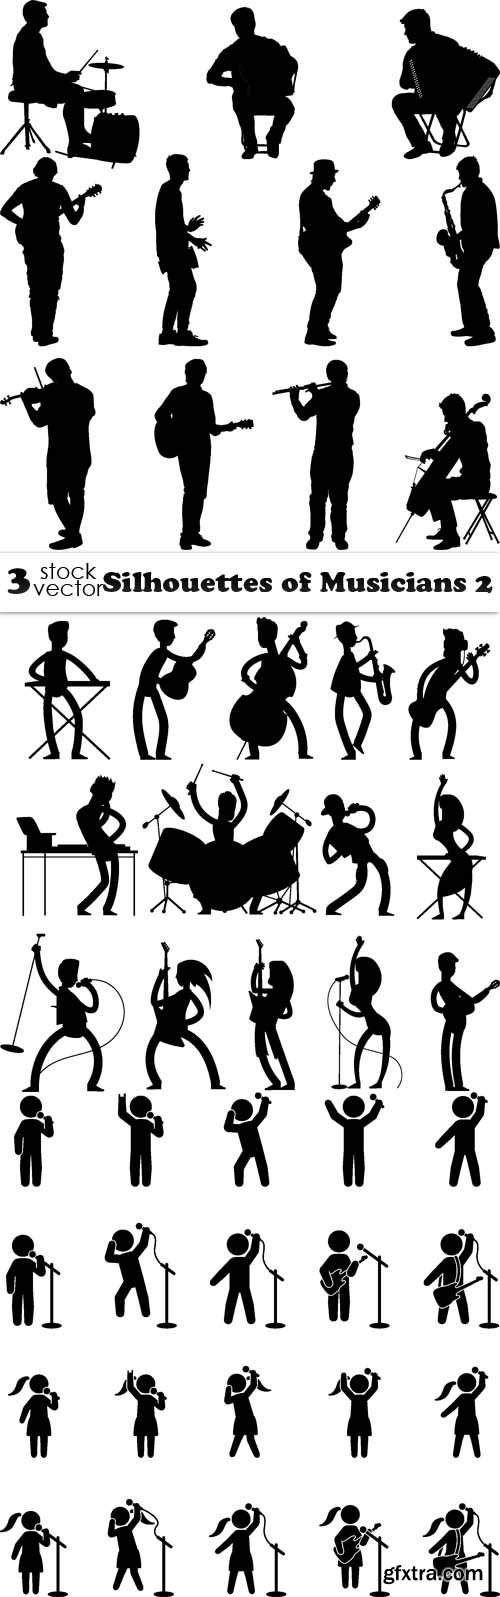 Vectors - Silhouettes of Musicians 2